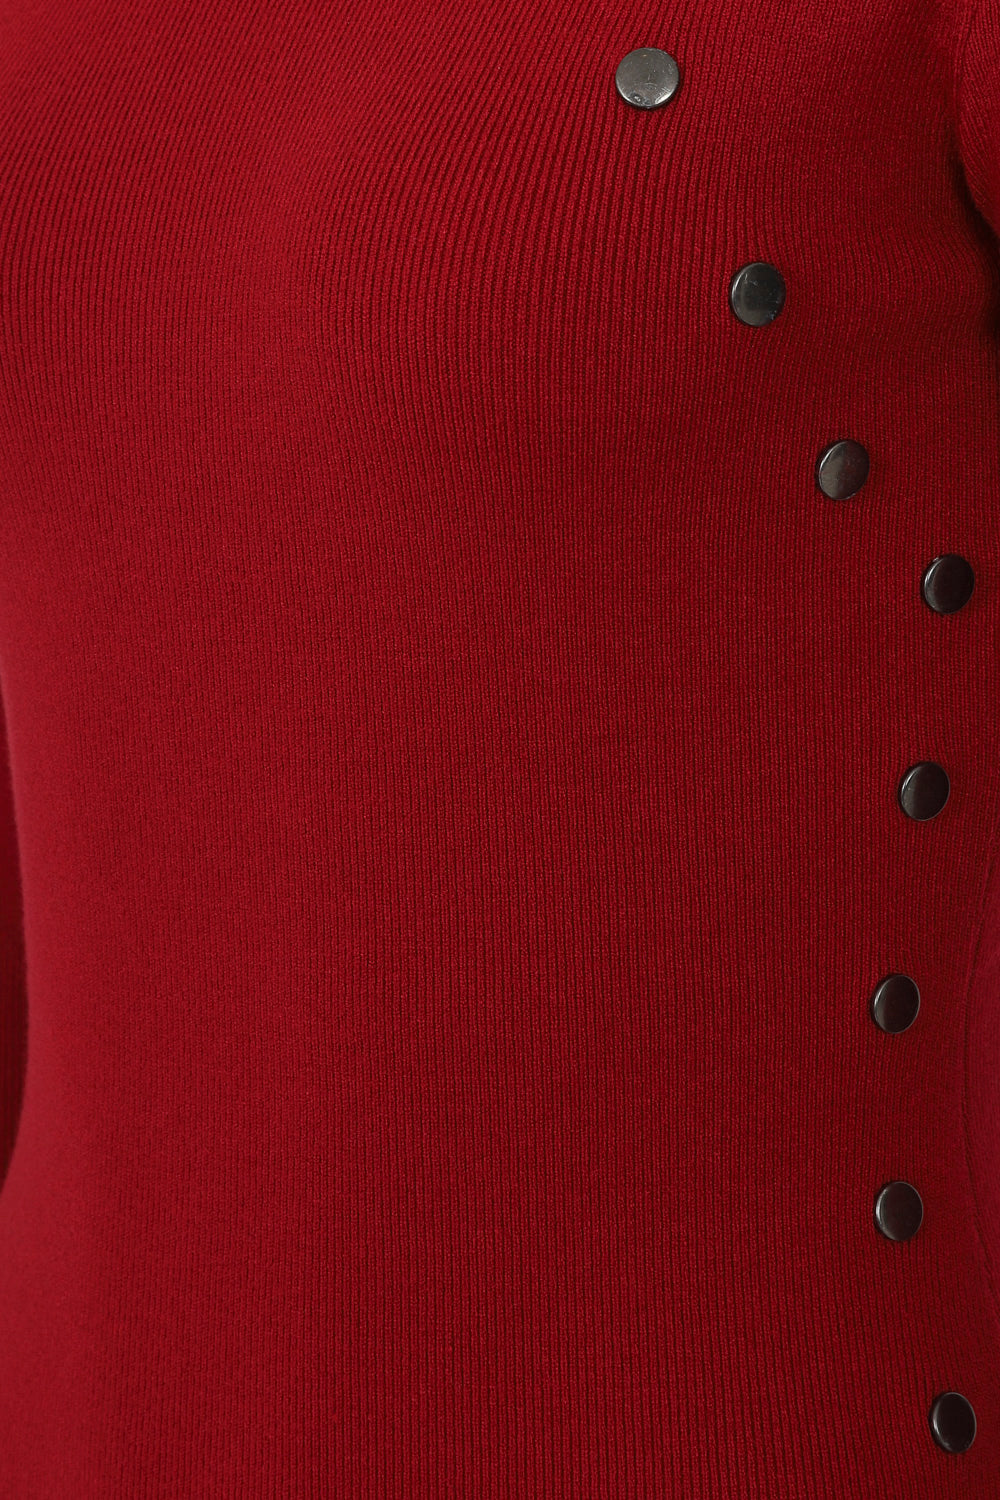 Celina Red Button Ribbed Knitted Long Sleeve Double Slit Mini Dress